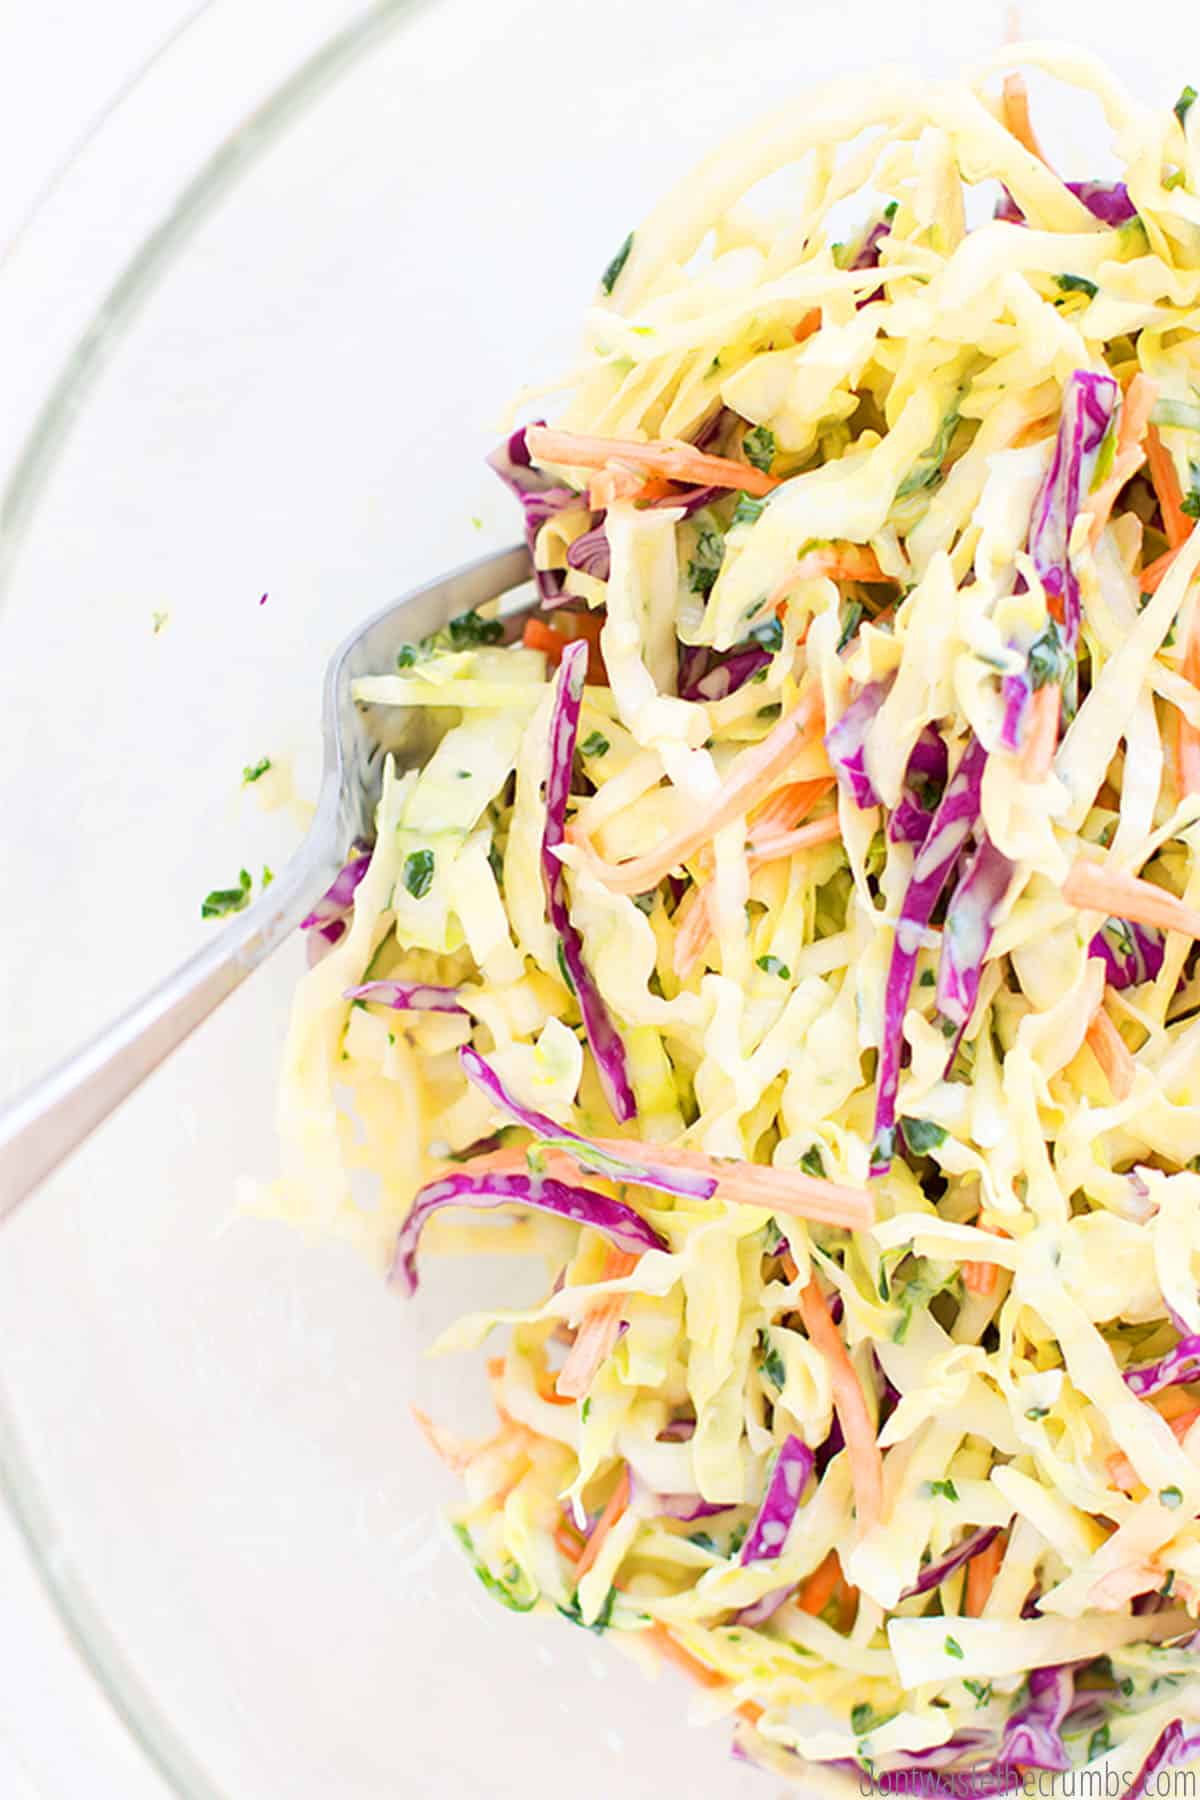 Green and red cabbage, sliced carrots, and pieces of cilantro are shredded and covered with a creamy dressing.